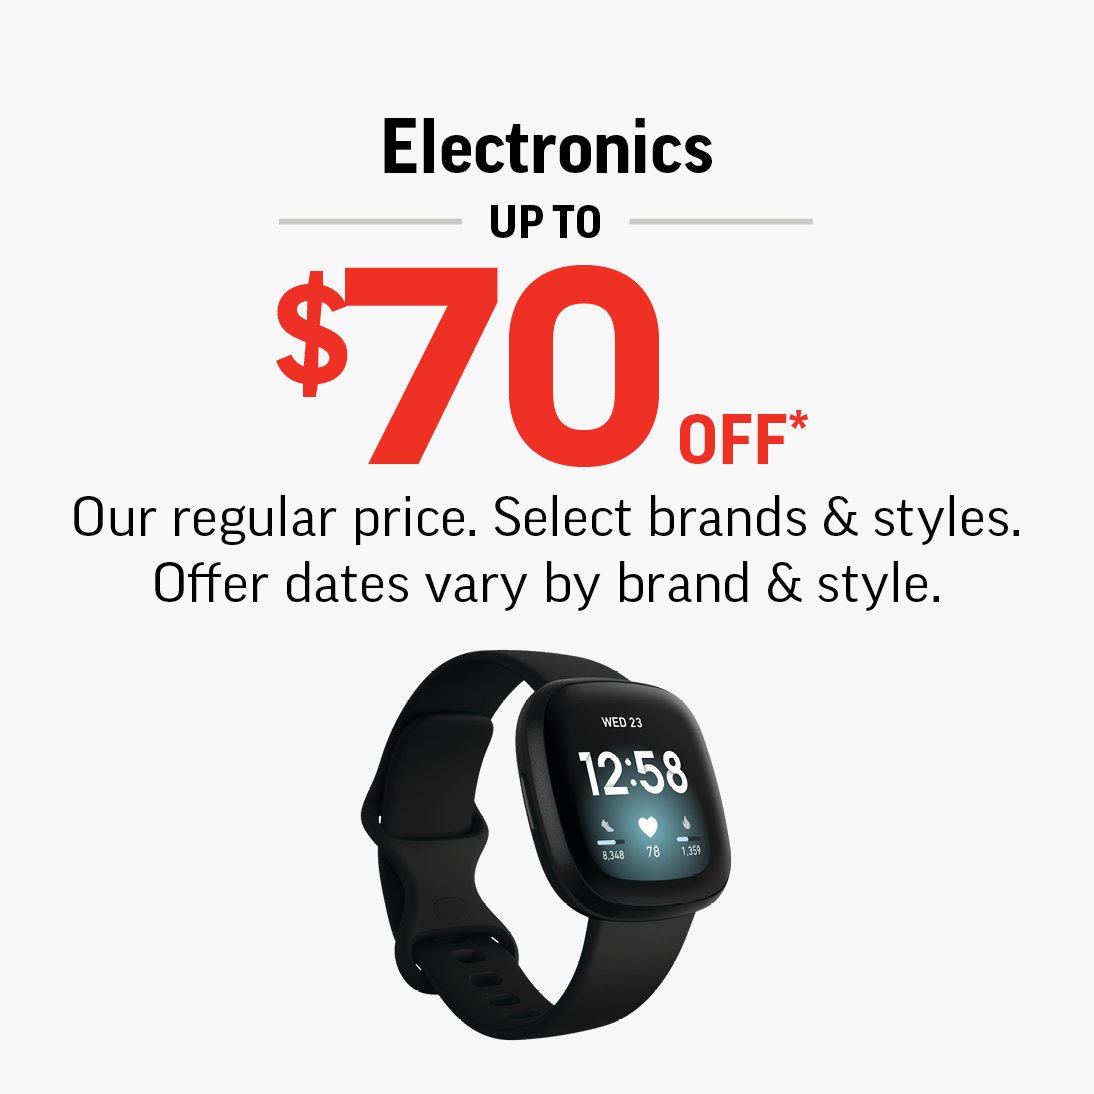 ELECTRONICS UP TO $70 OFF